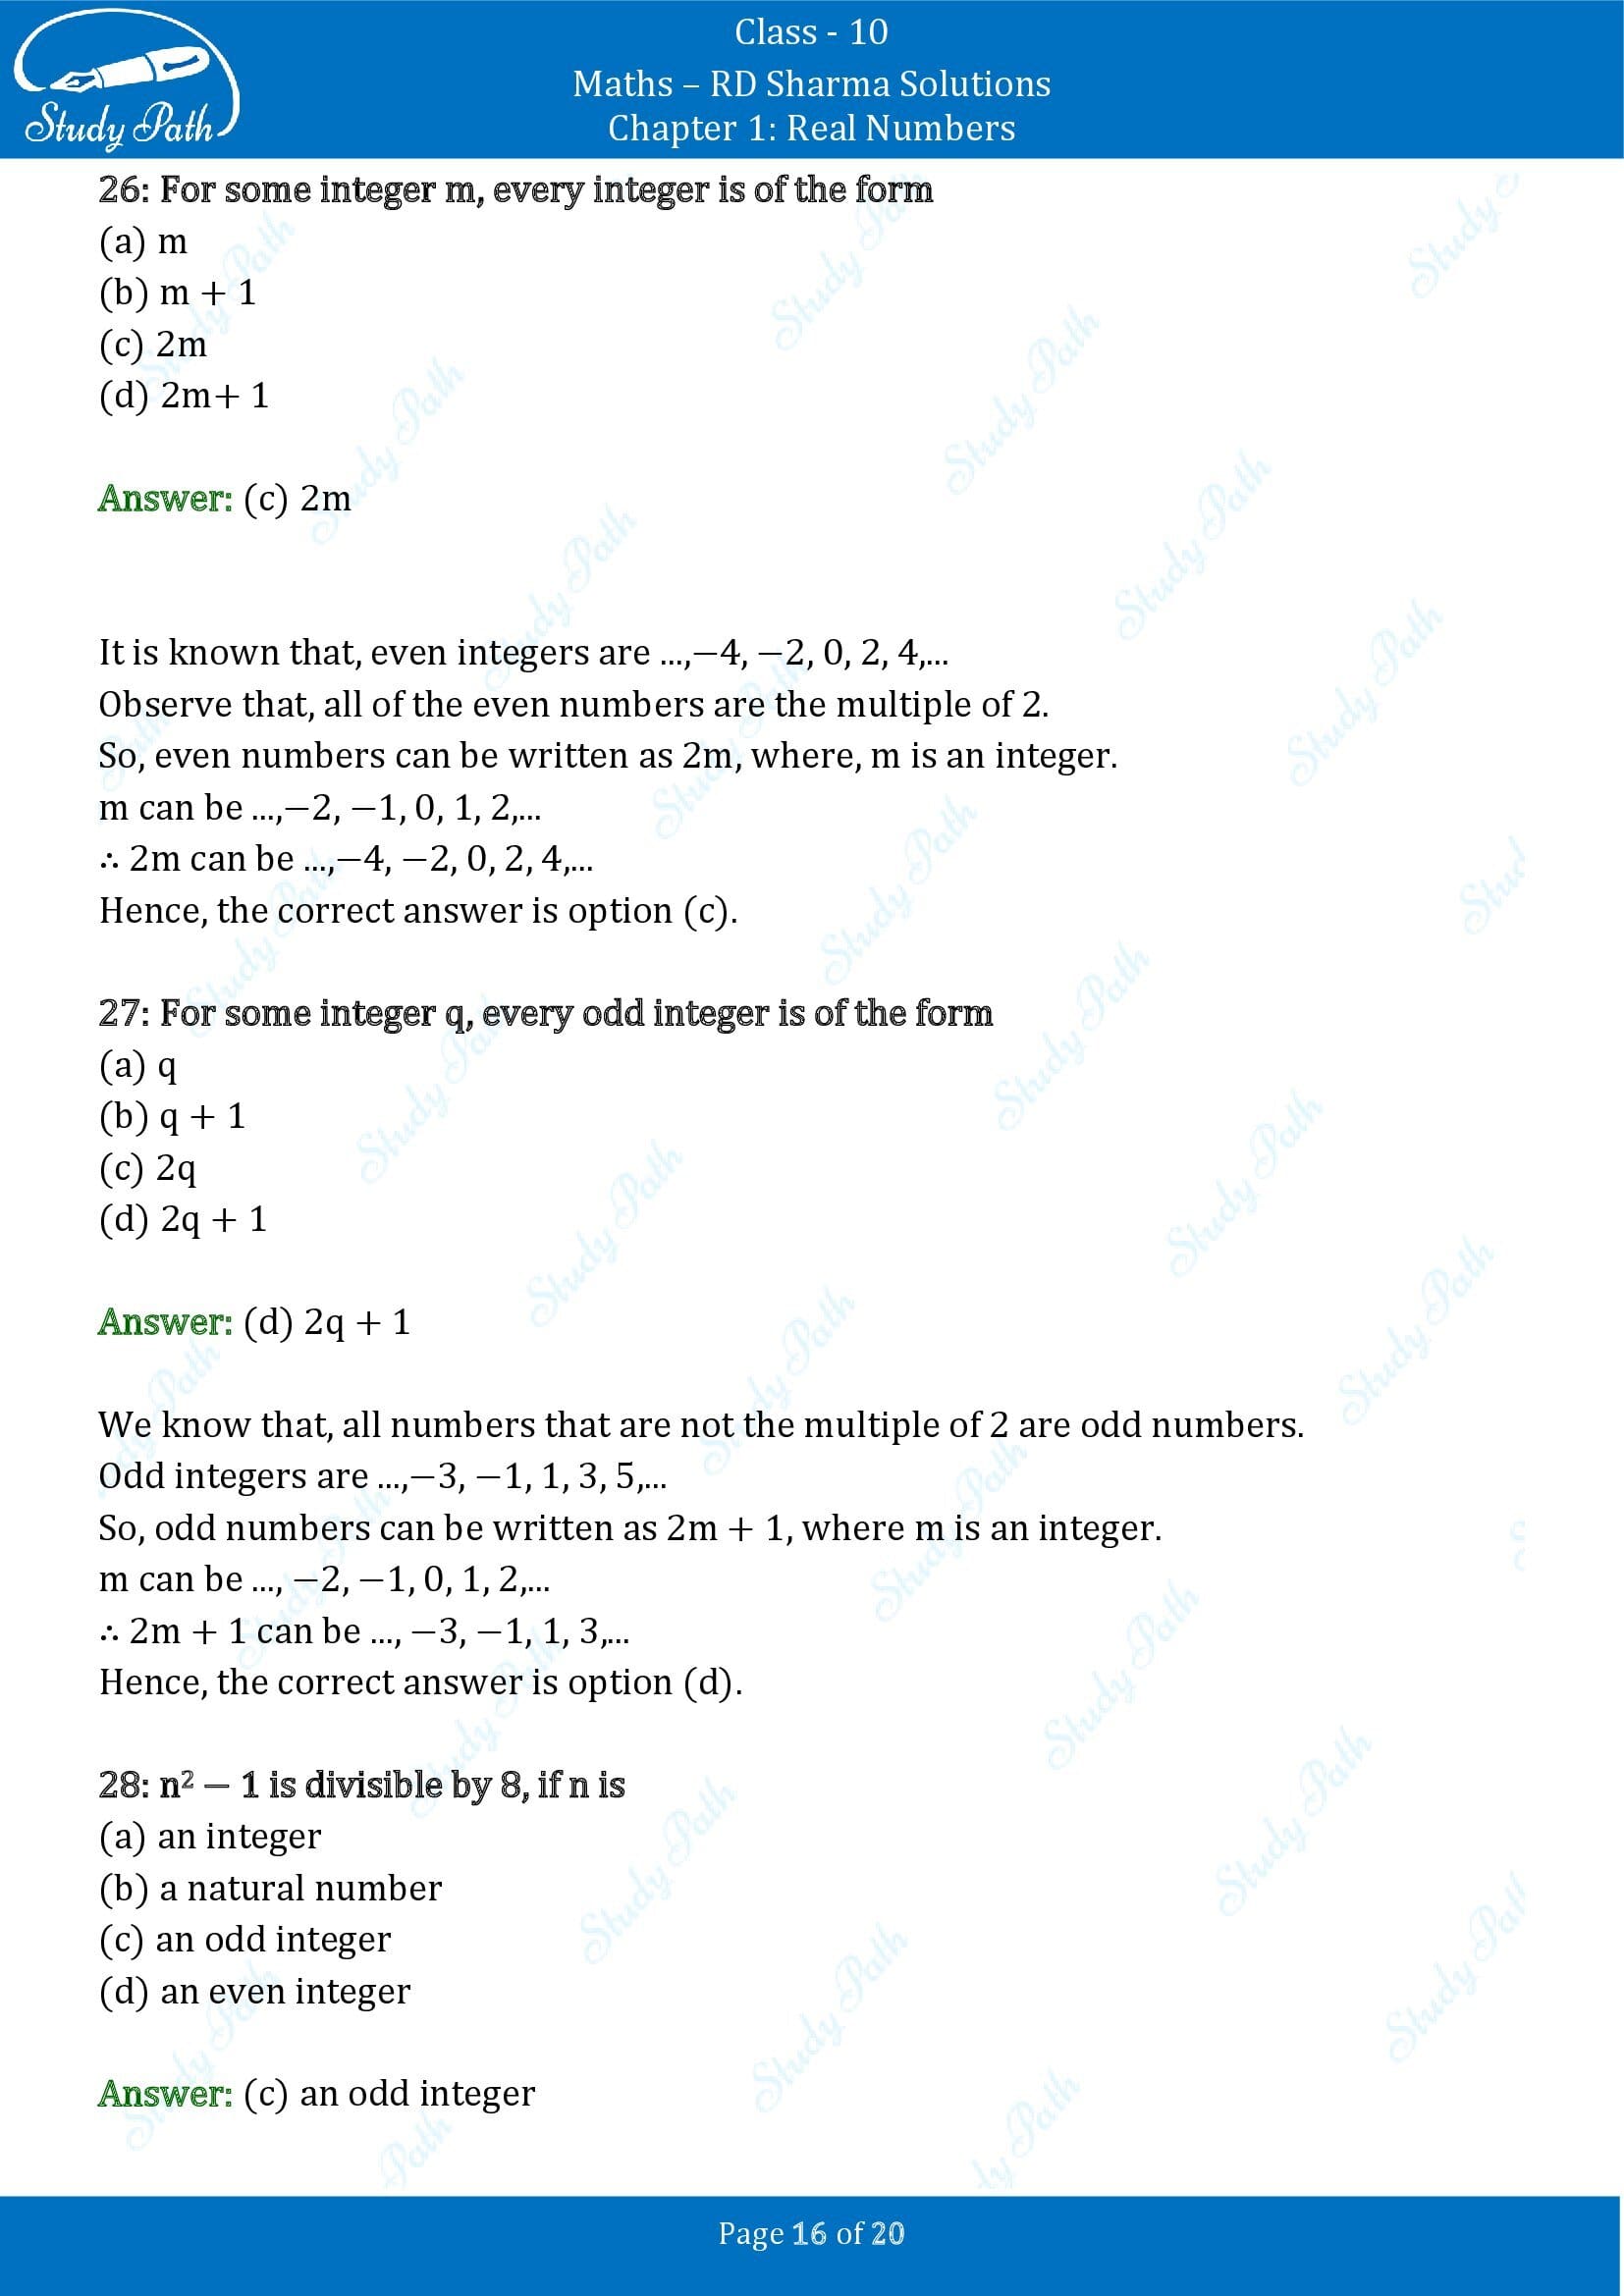 RD Sharma Solutions Class 10 Chapter 1 Real Numbers Multiple Choice Questions MCQs 00016